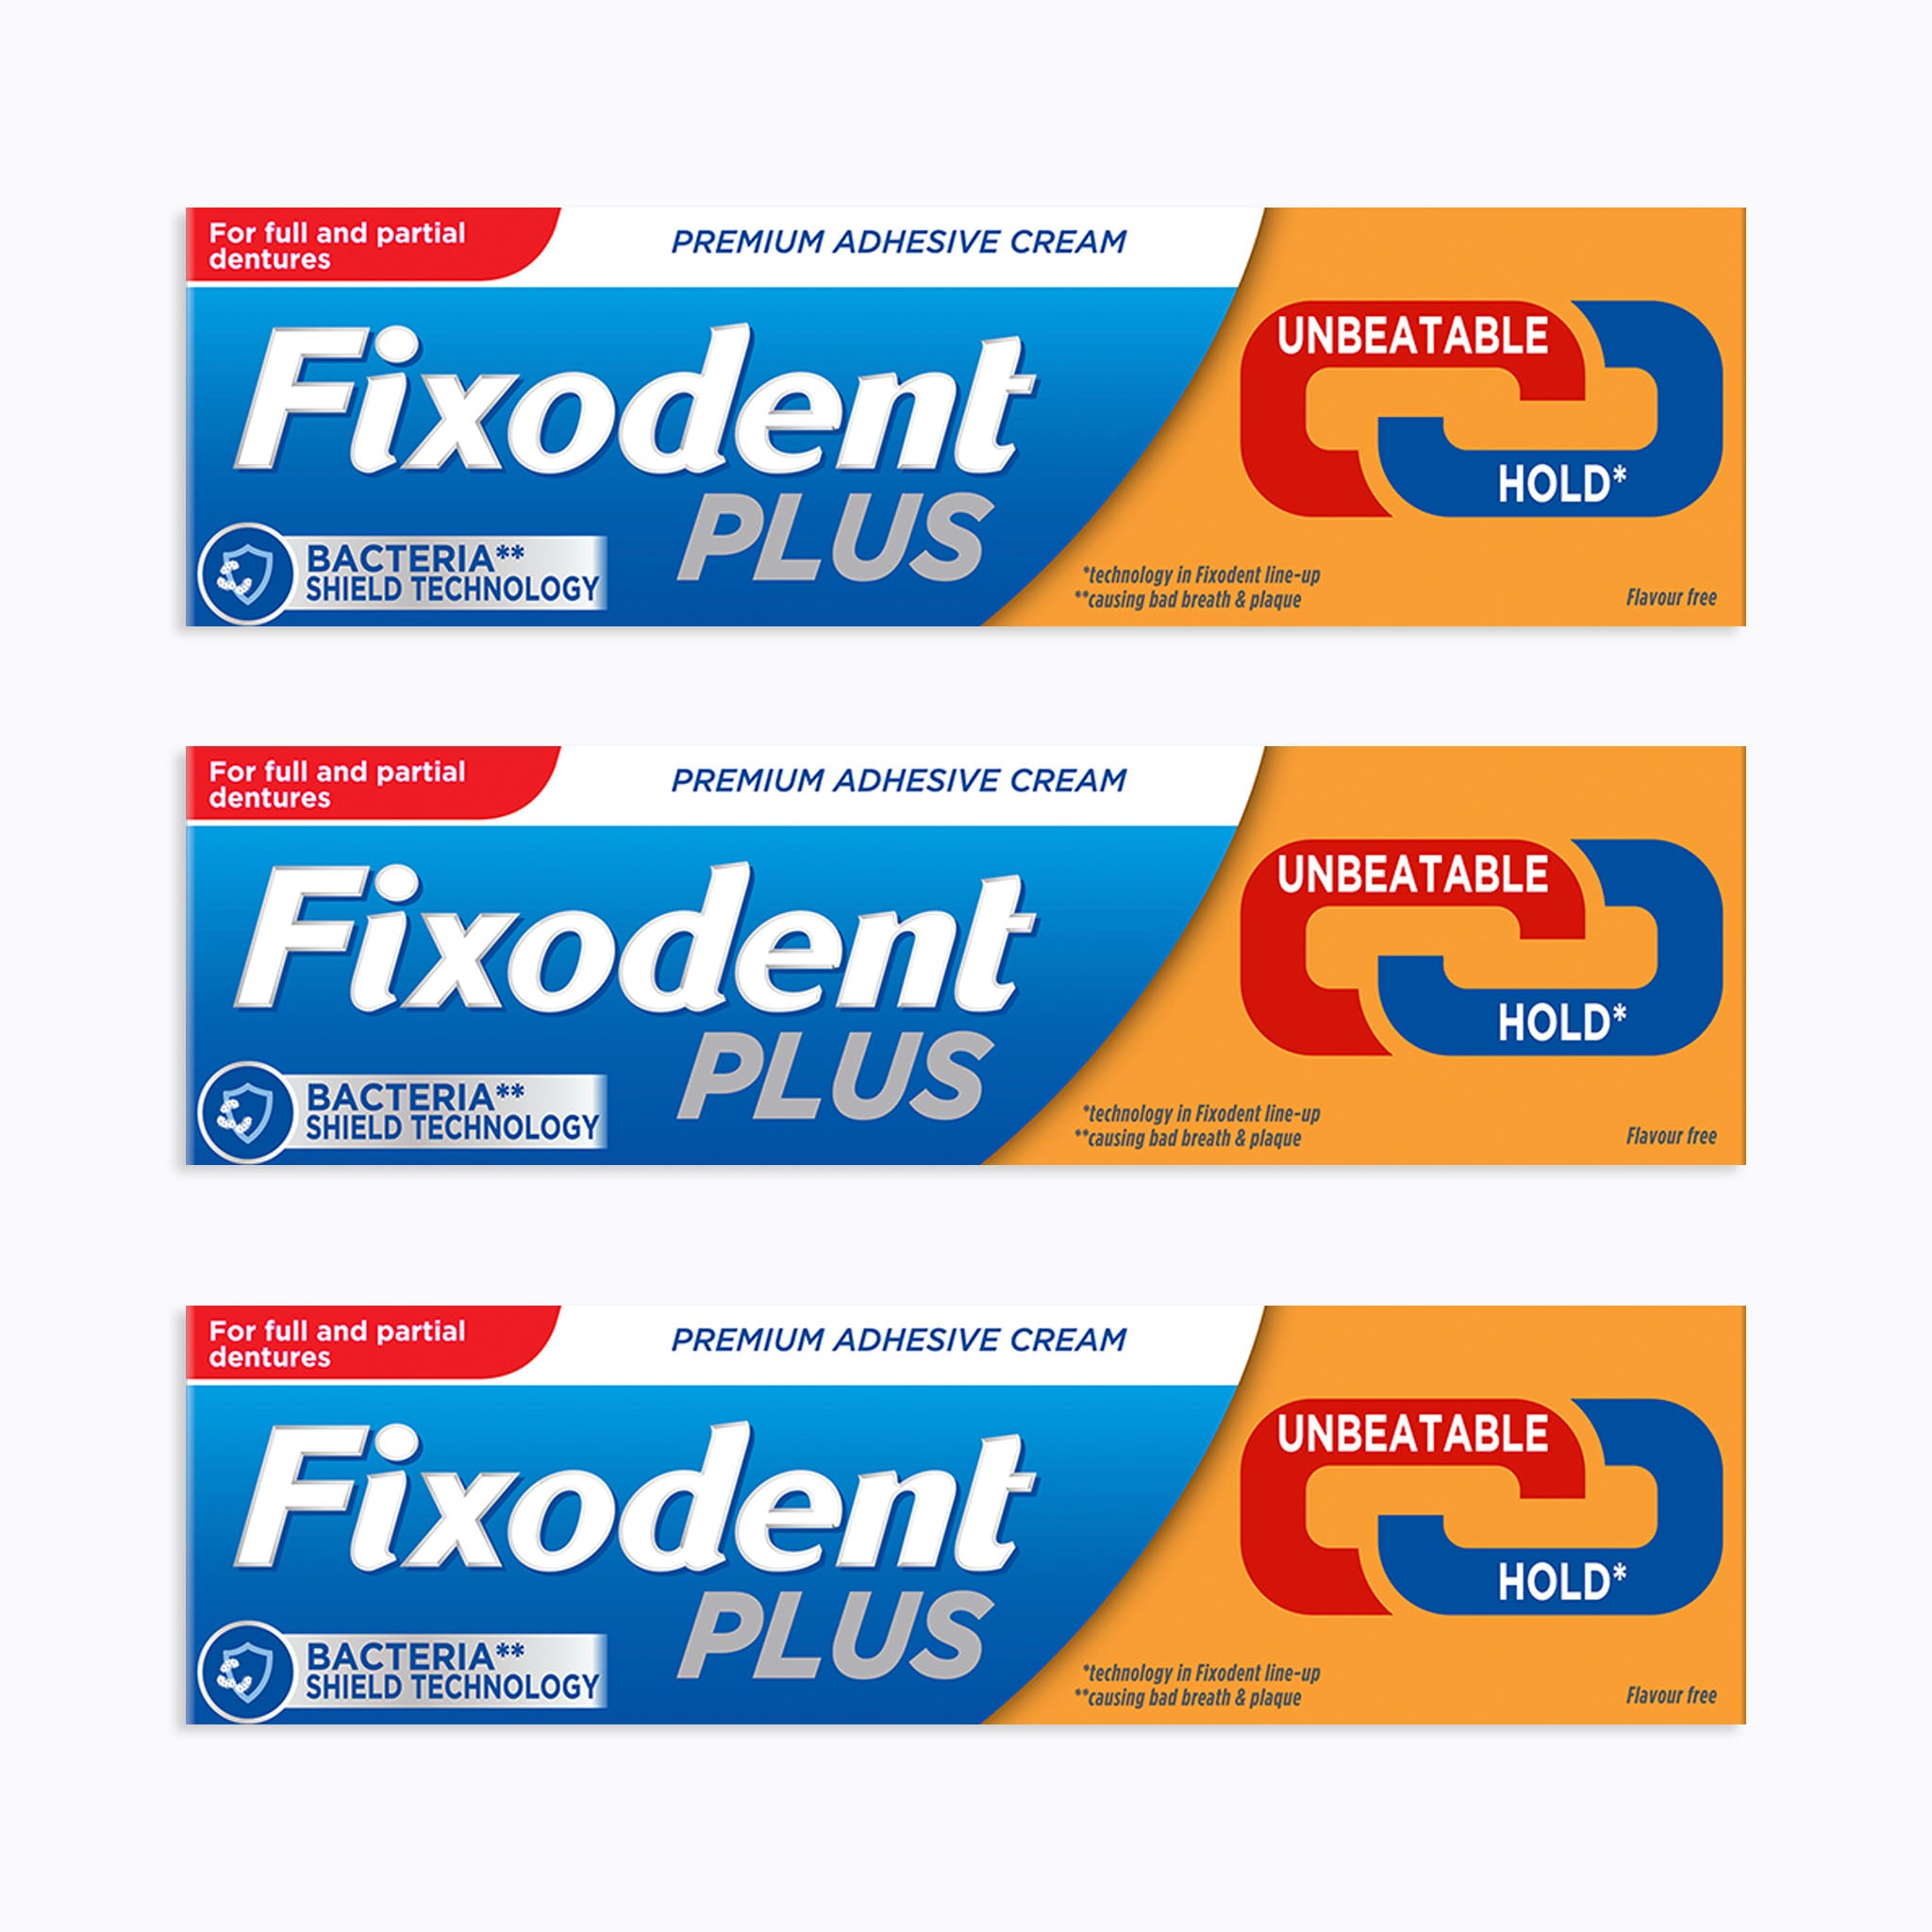 3 x Fixodent Plus Dual Power Best Hold - 40g